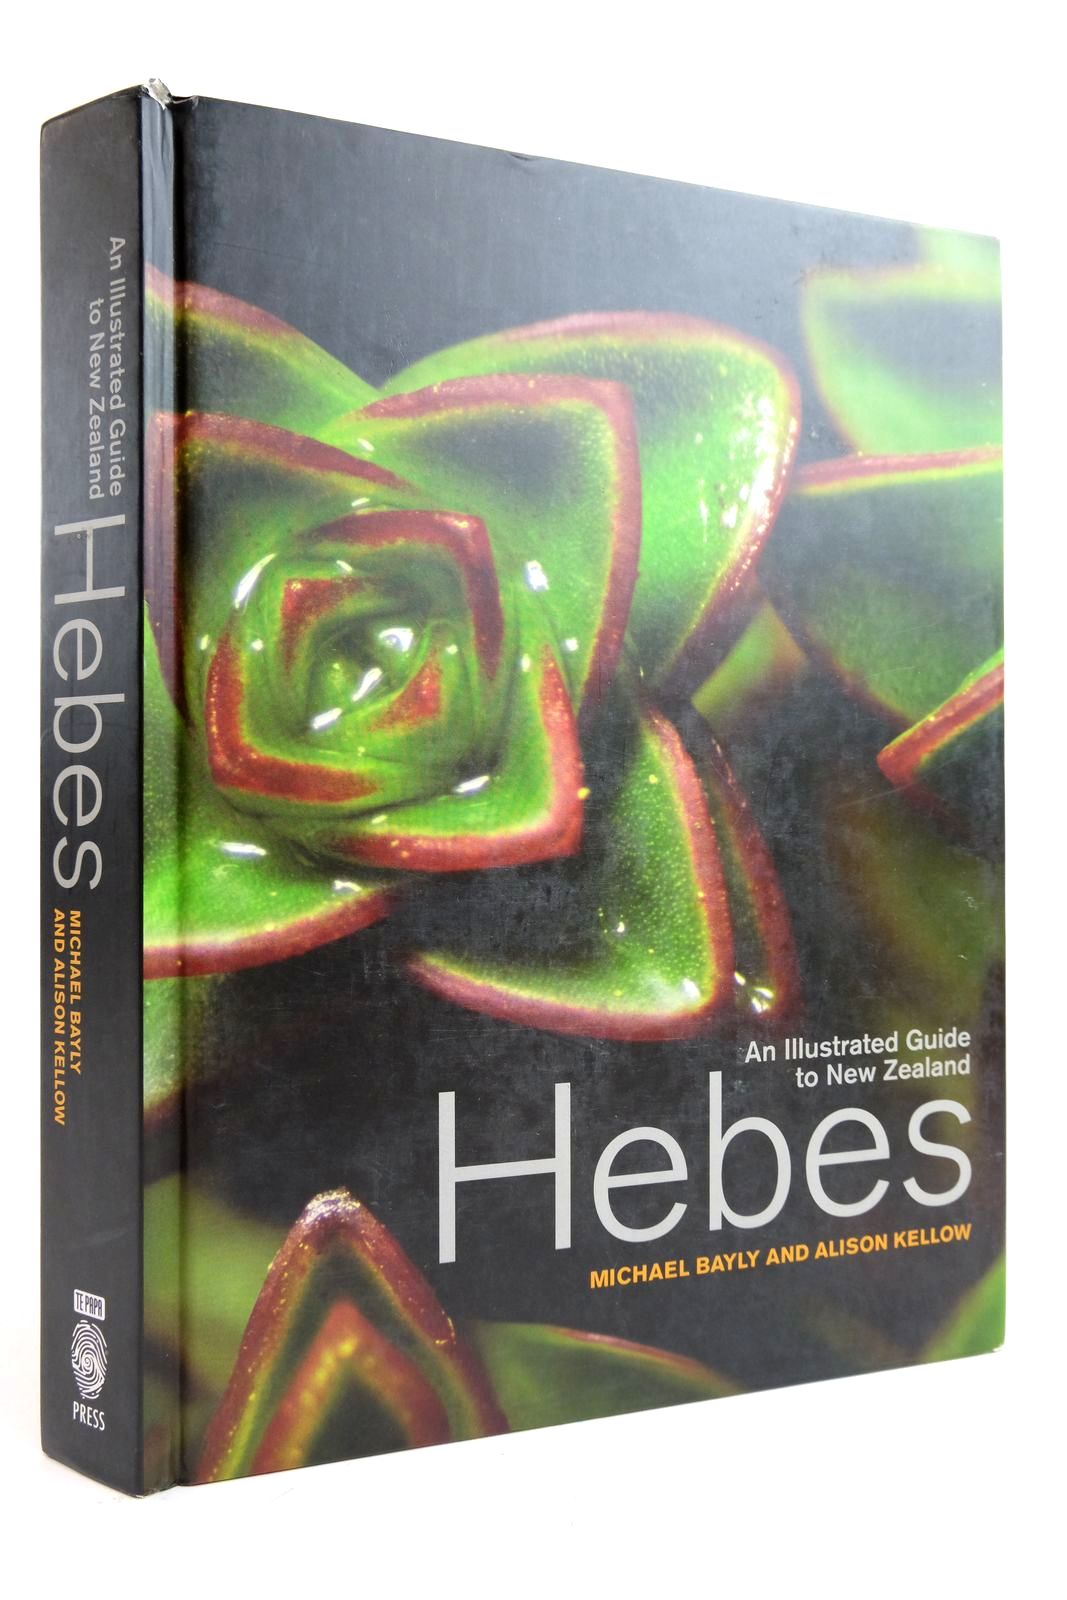 Photo of AN ILLUSTRATED GUIDE TO NEW ZEALAND HEBES- Stock Number: 2135370